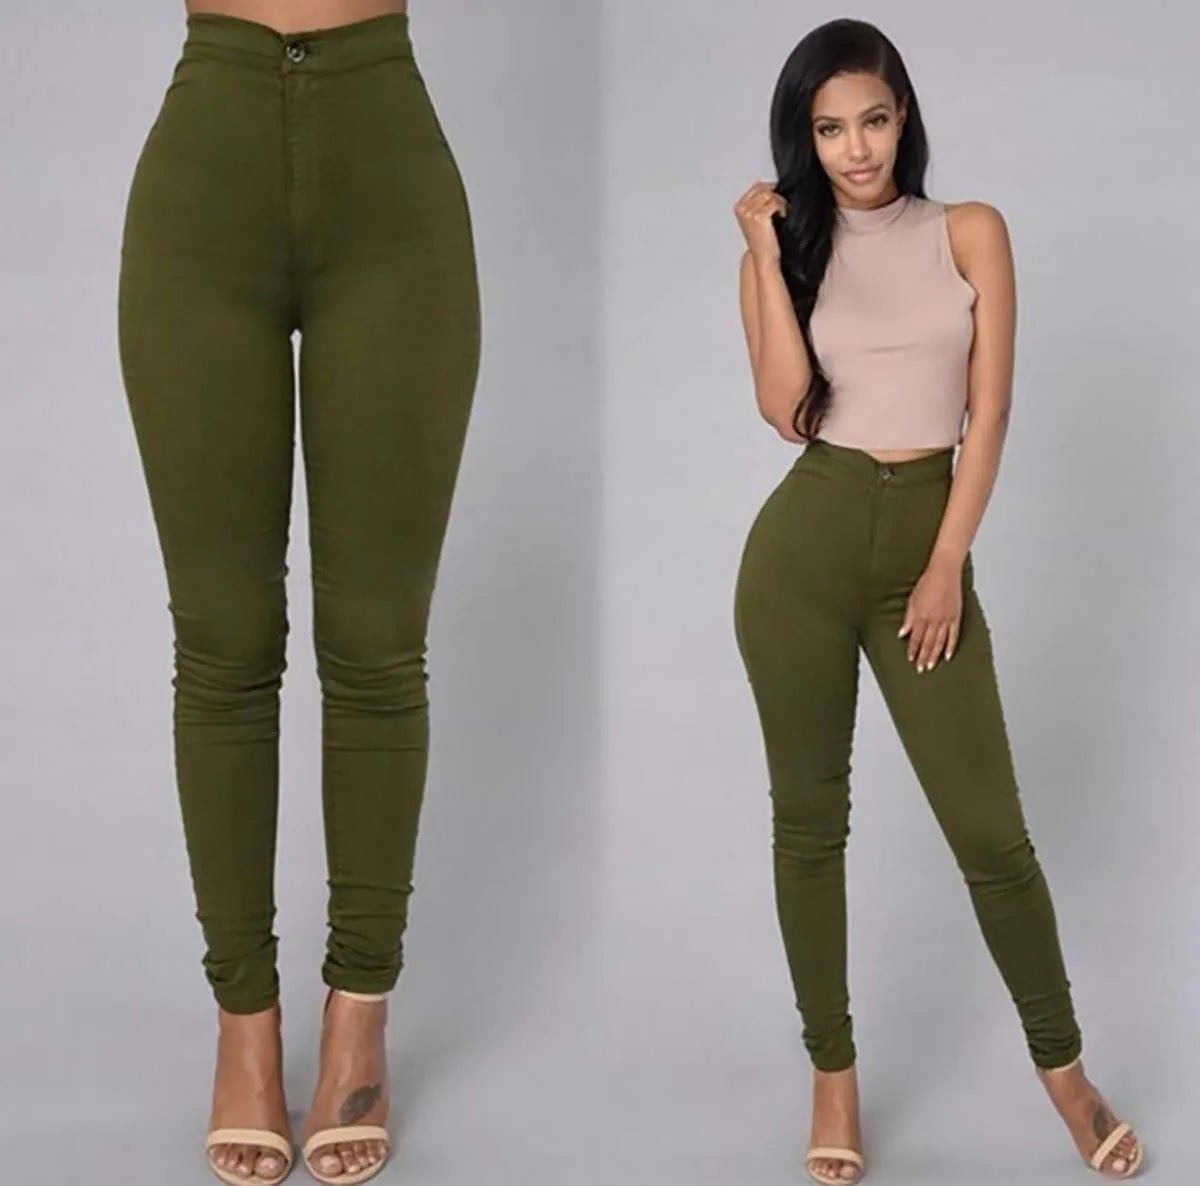 Women Pants Thin High Waist Solid Color Slim Fit Lady Pencil Trousers for Street Wear - CasualFlowshop